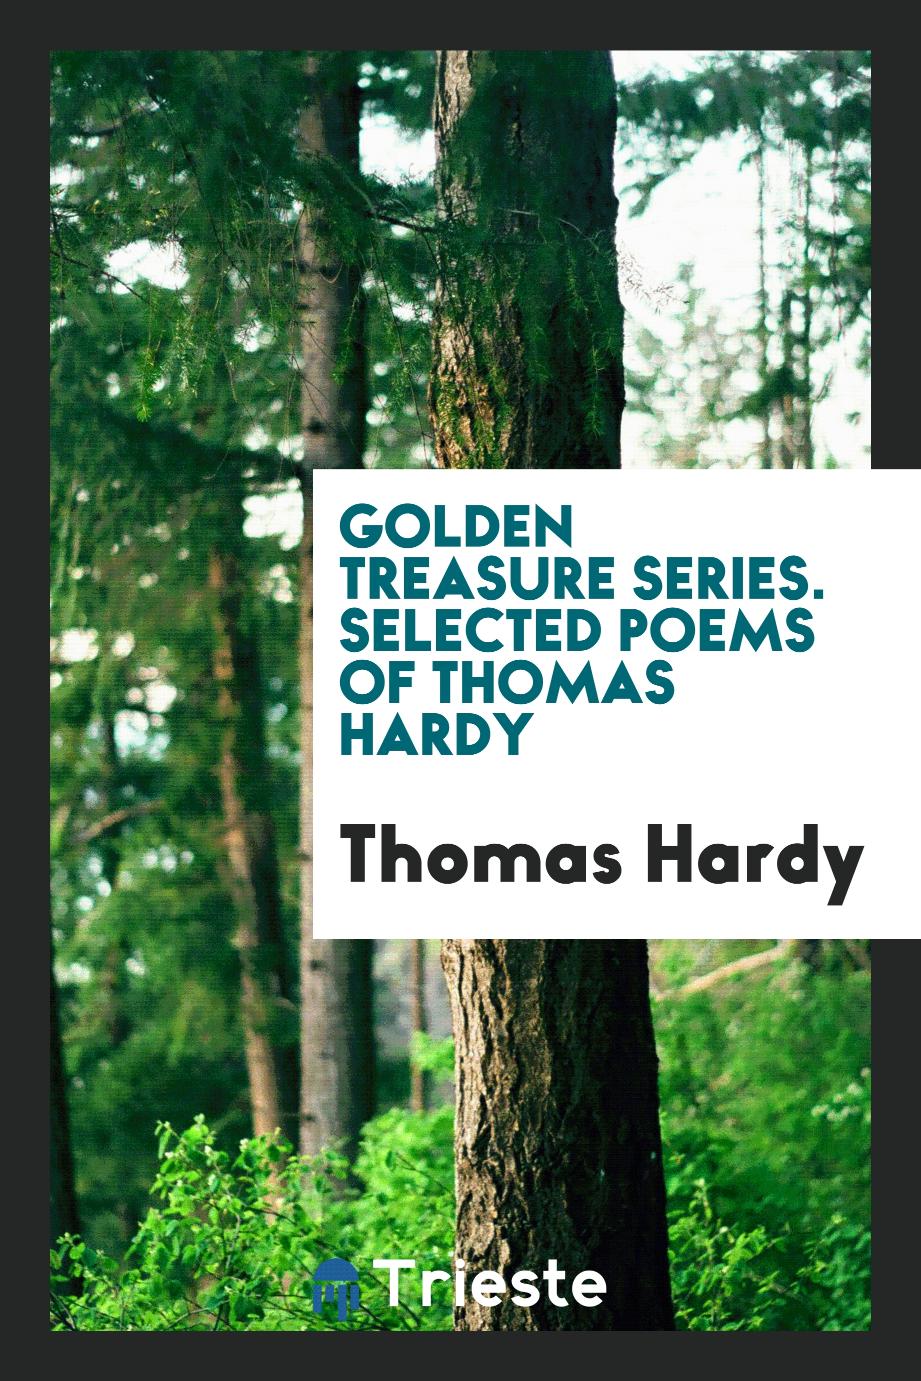 Golden Treasure Series. Selected poems of Thomas Hardy